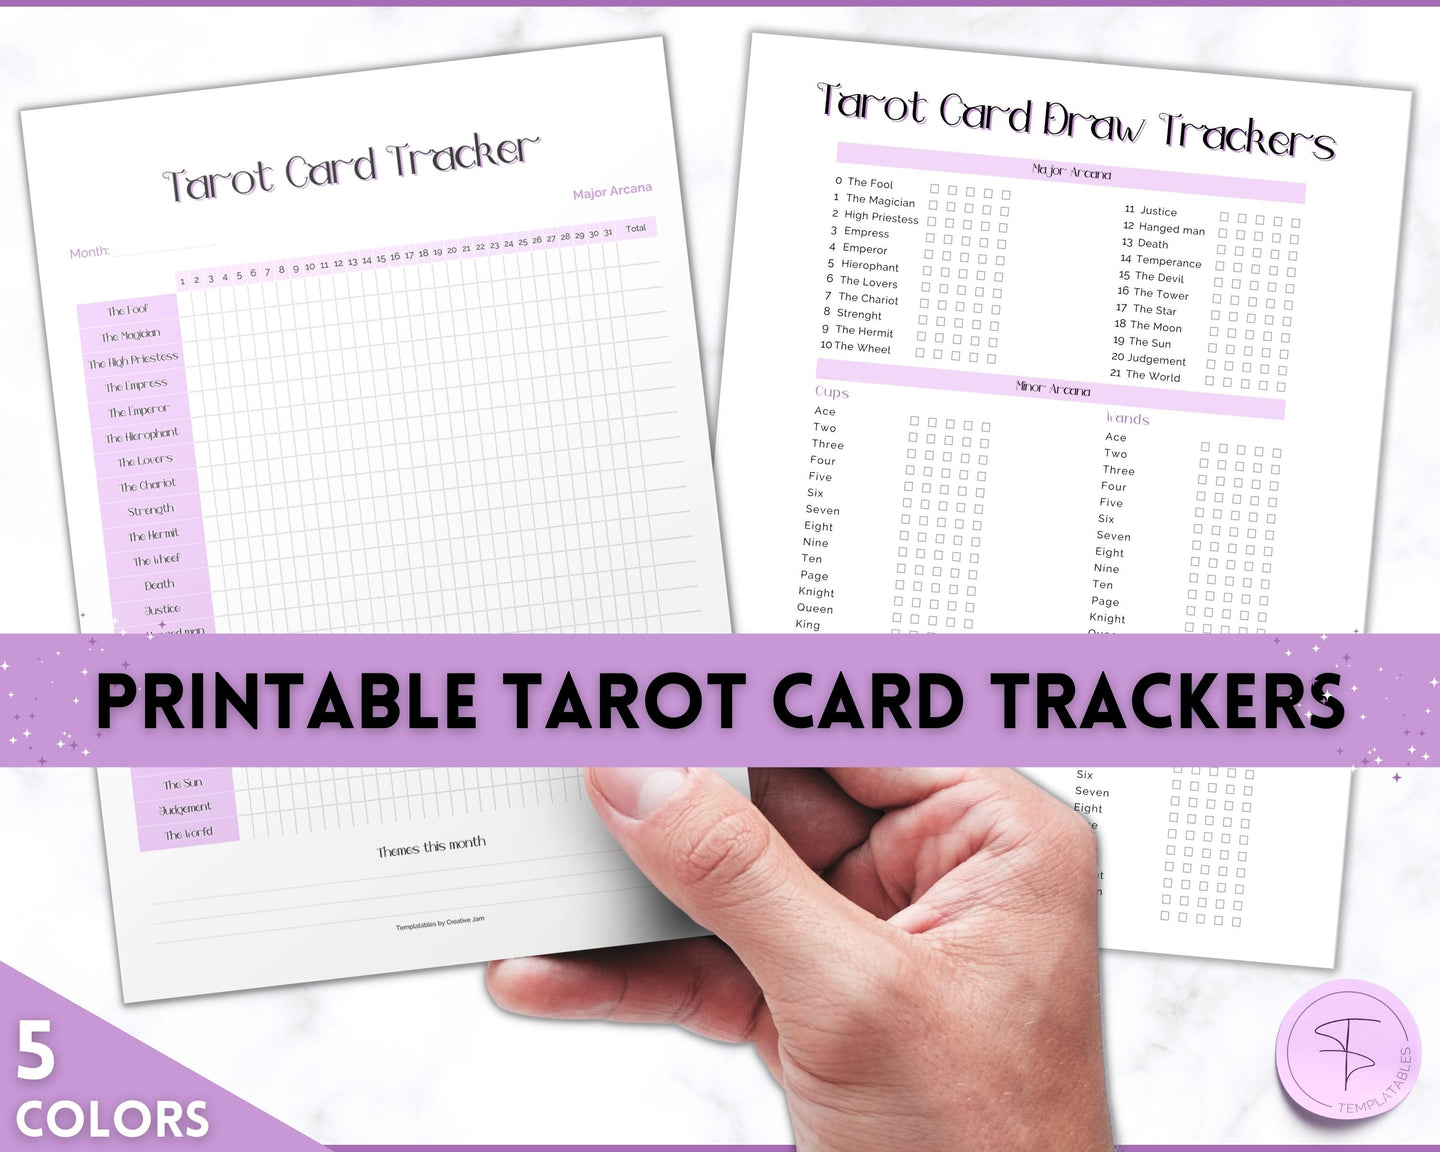 Tarot Card Trackers & Monthly Readings | Learn Tarot Card Readings, Tarot Spreads | Beginner Tarot Planner Workbook, Grimoire & Cheat Sheets | Purple